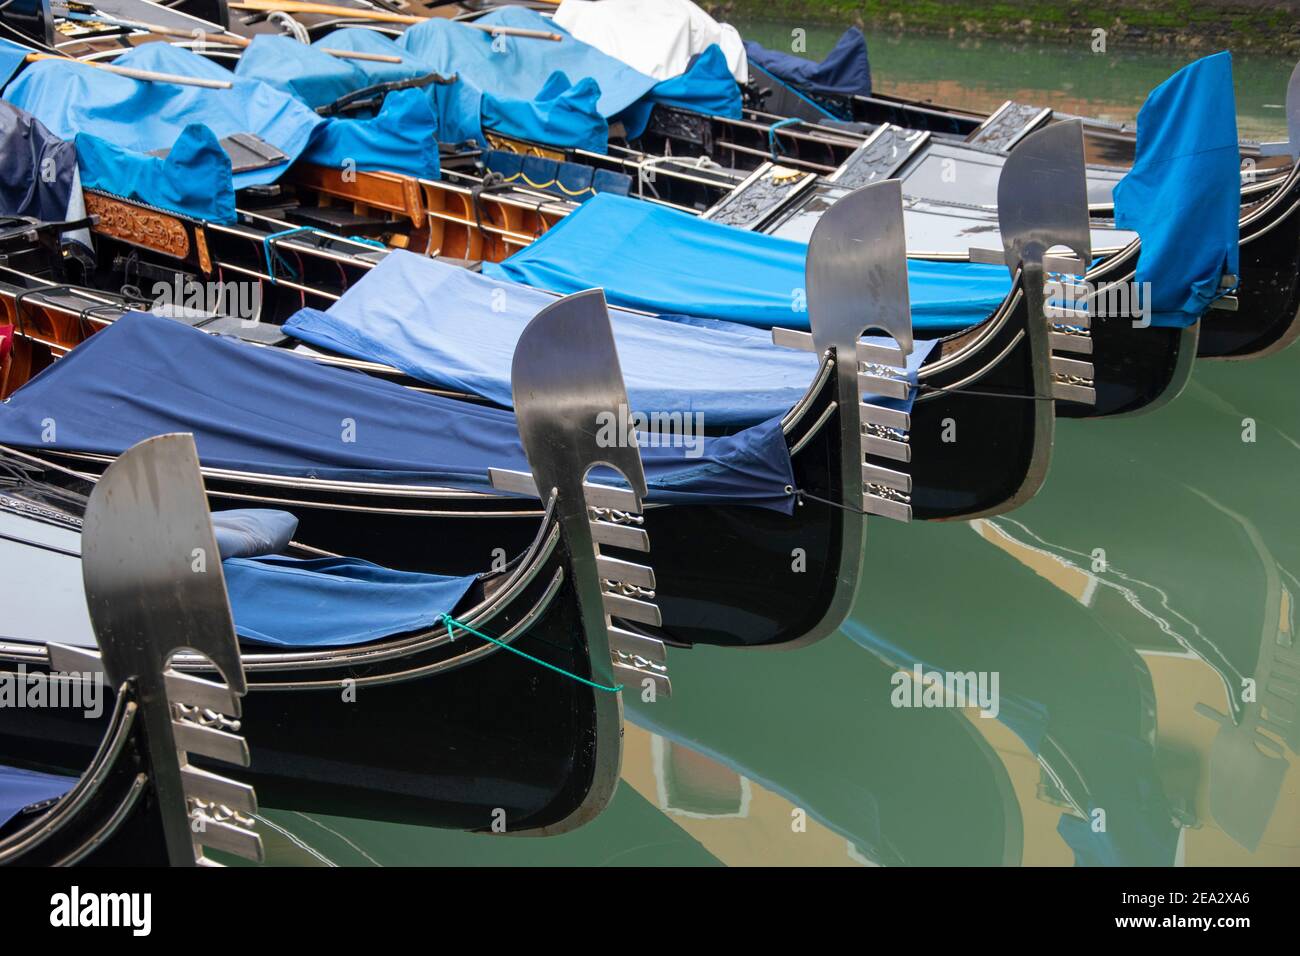 The gondola, typical boat of the city of Venice, Italy, Europe. Stock Photo